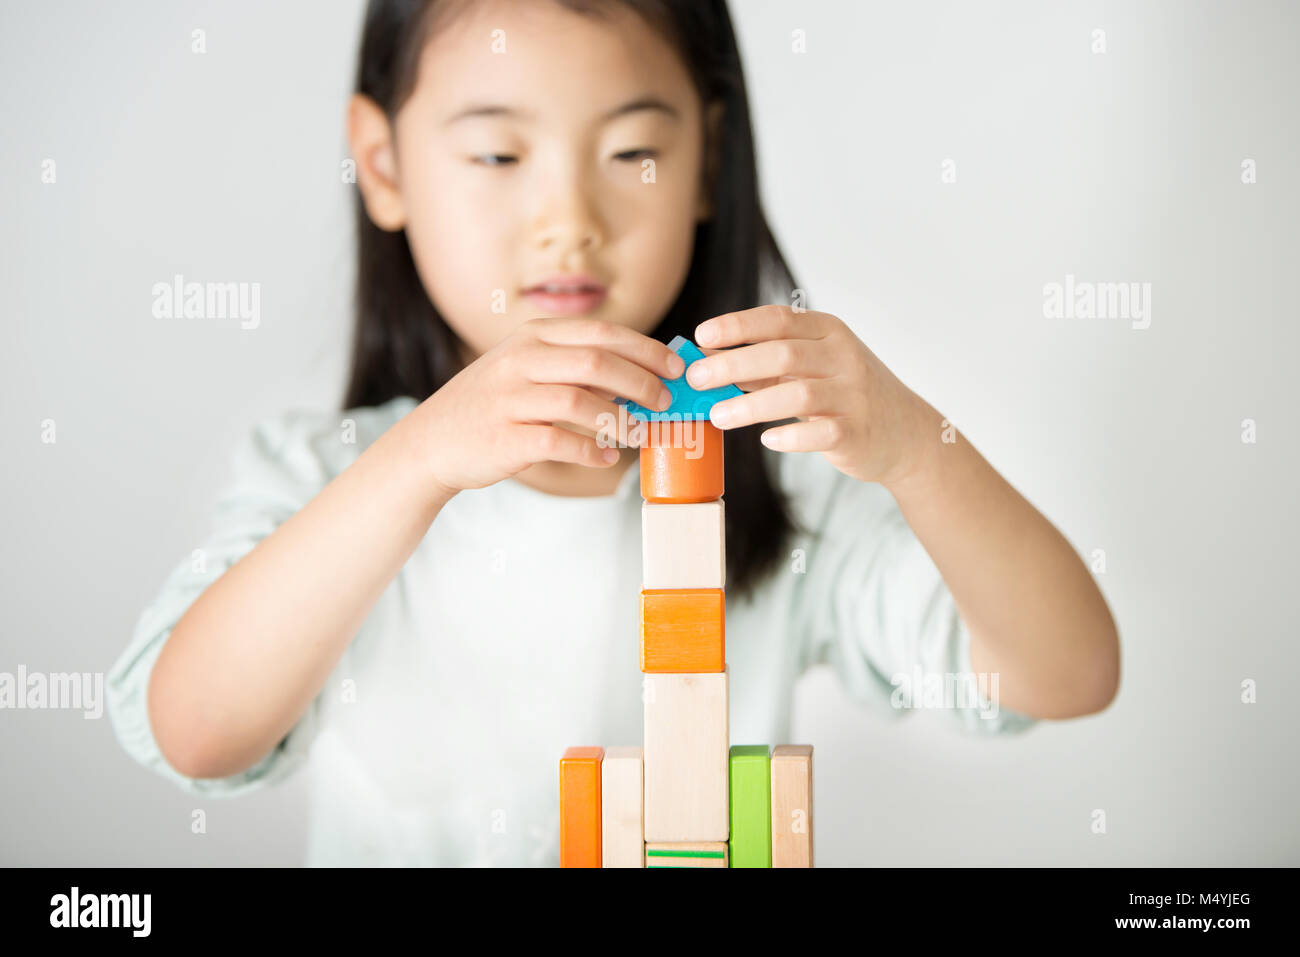 little Asian girl playing colorful wood blocks Stock Photo